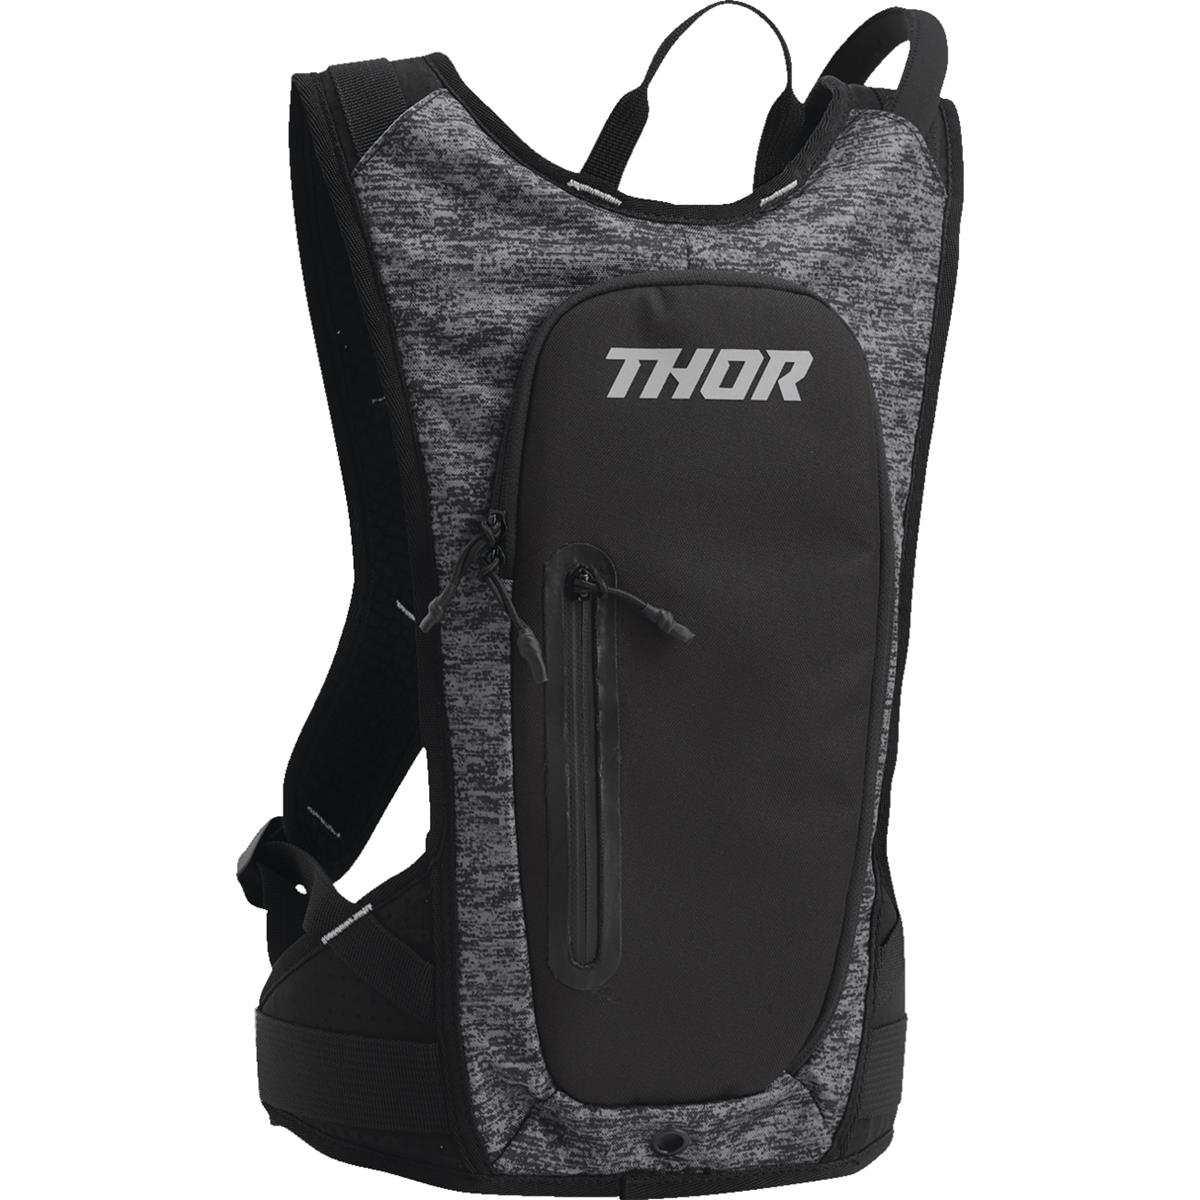 Thor Hydration Pack Vapor Charcoal/Heather